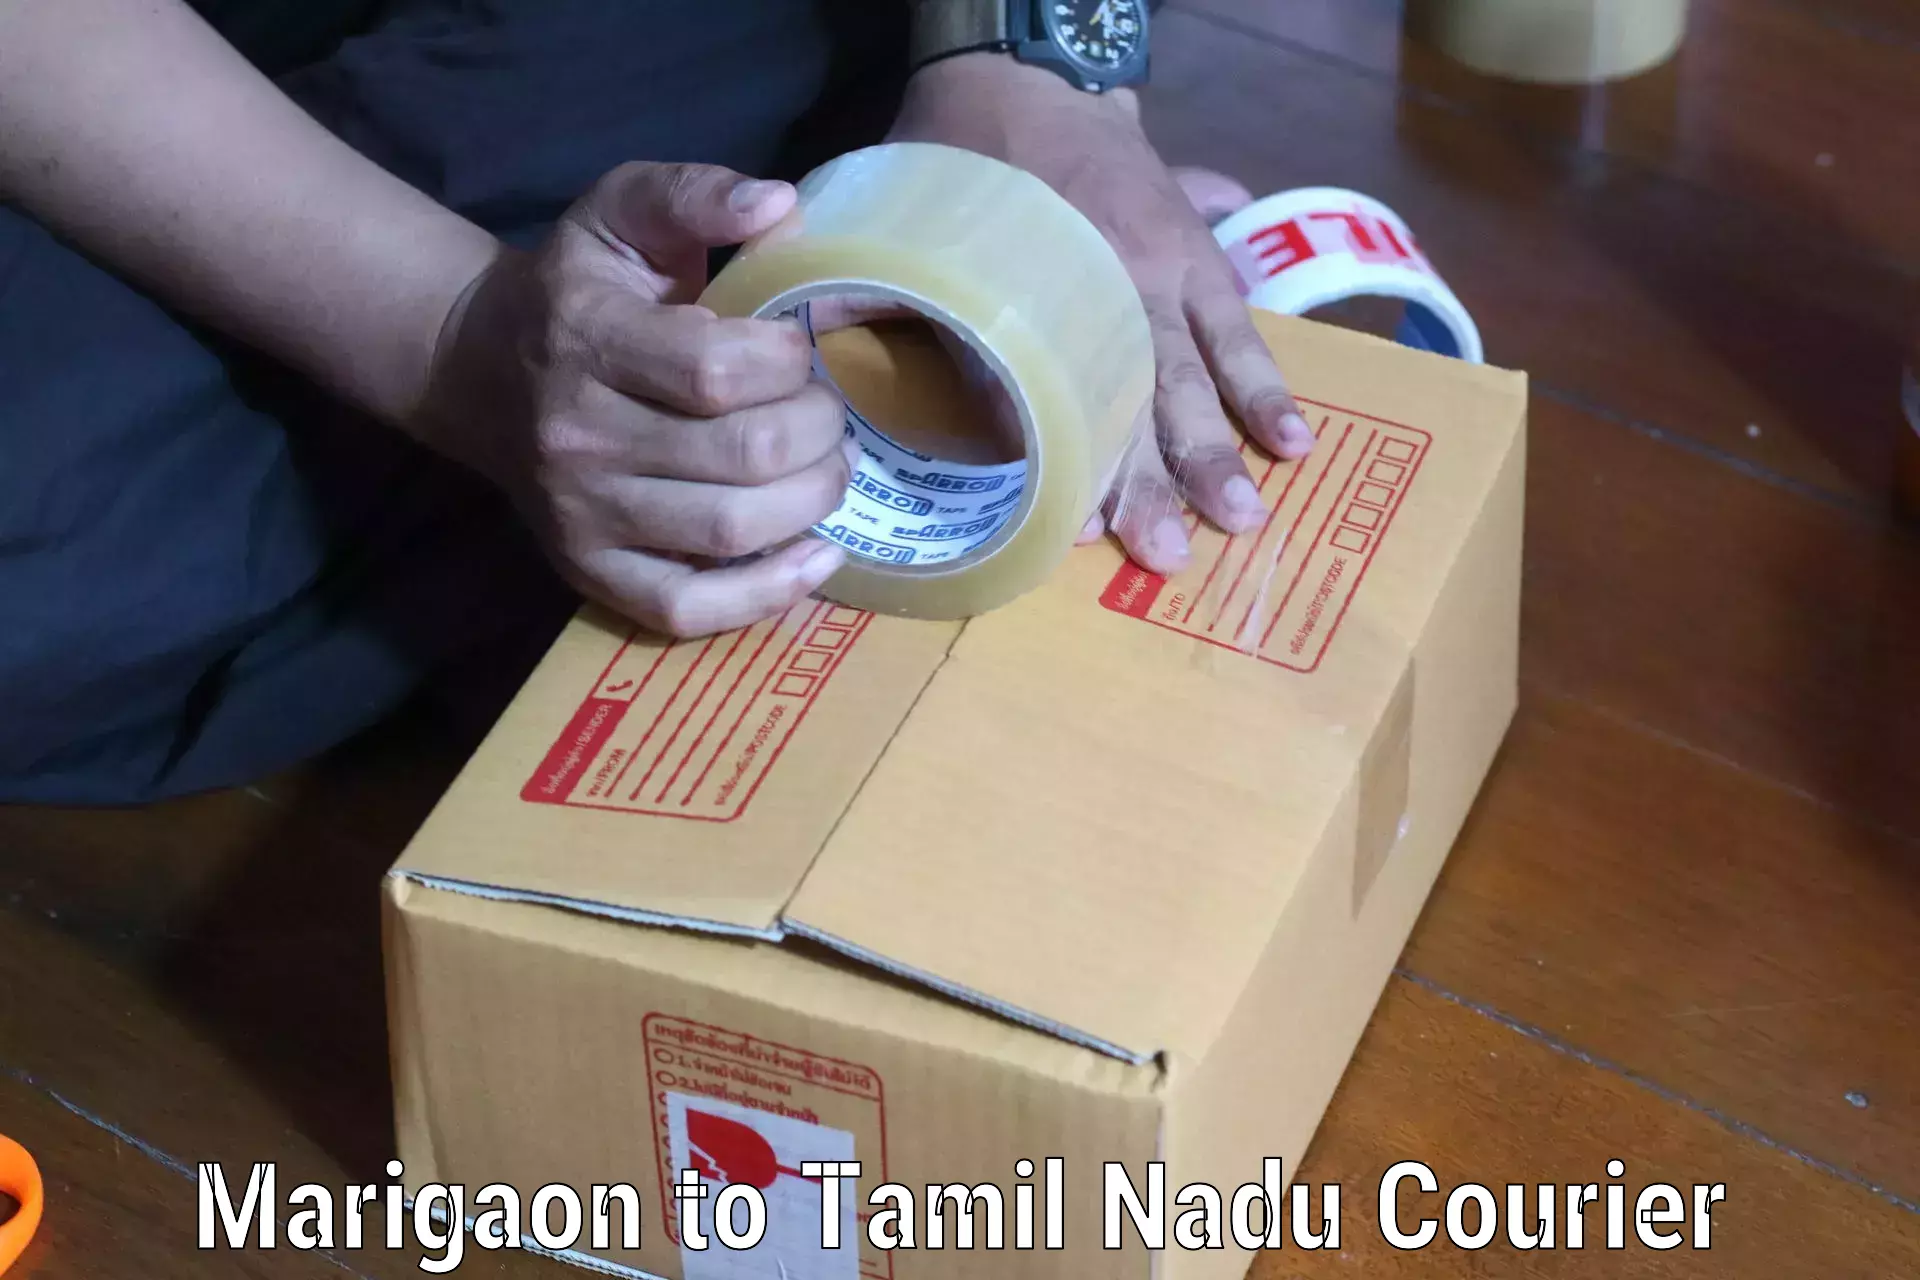 Courier service booking in Marigaon to Chennai Port